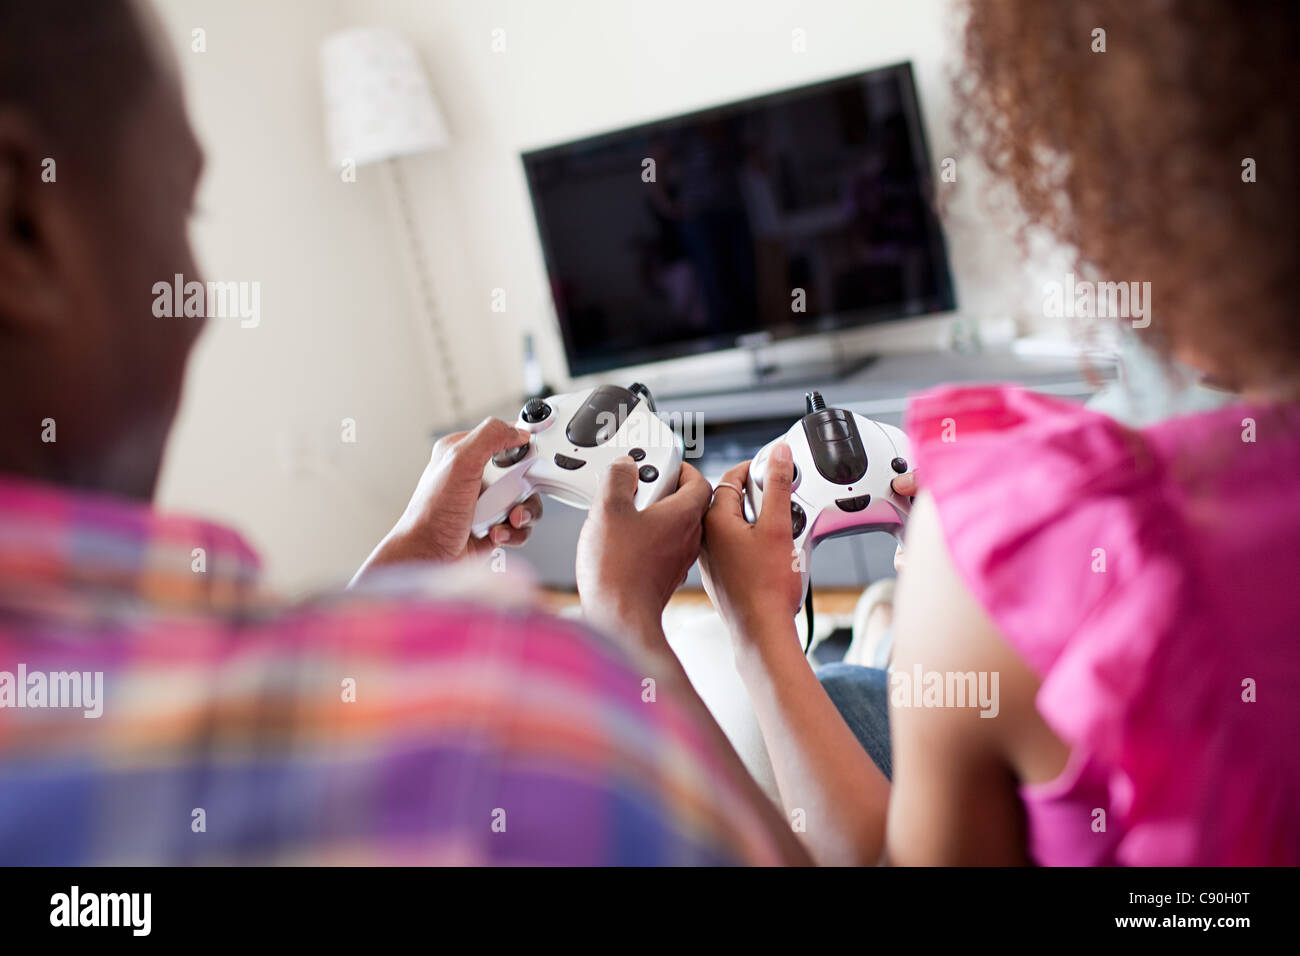 Couple playing video game at home Stock Photo